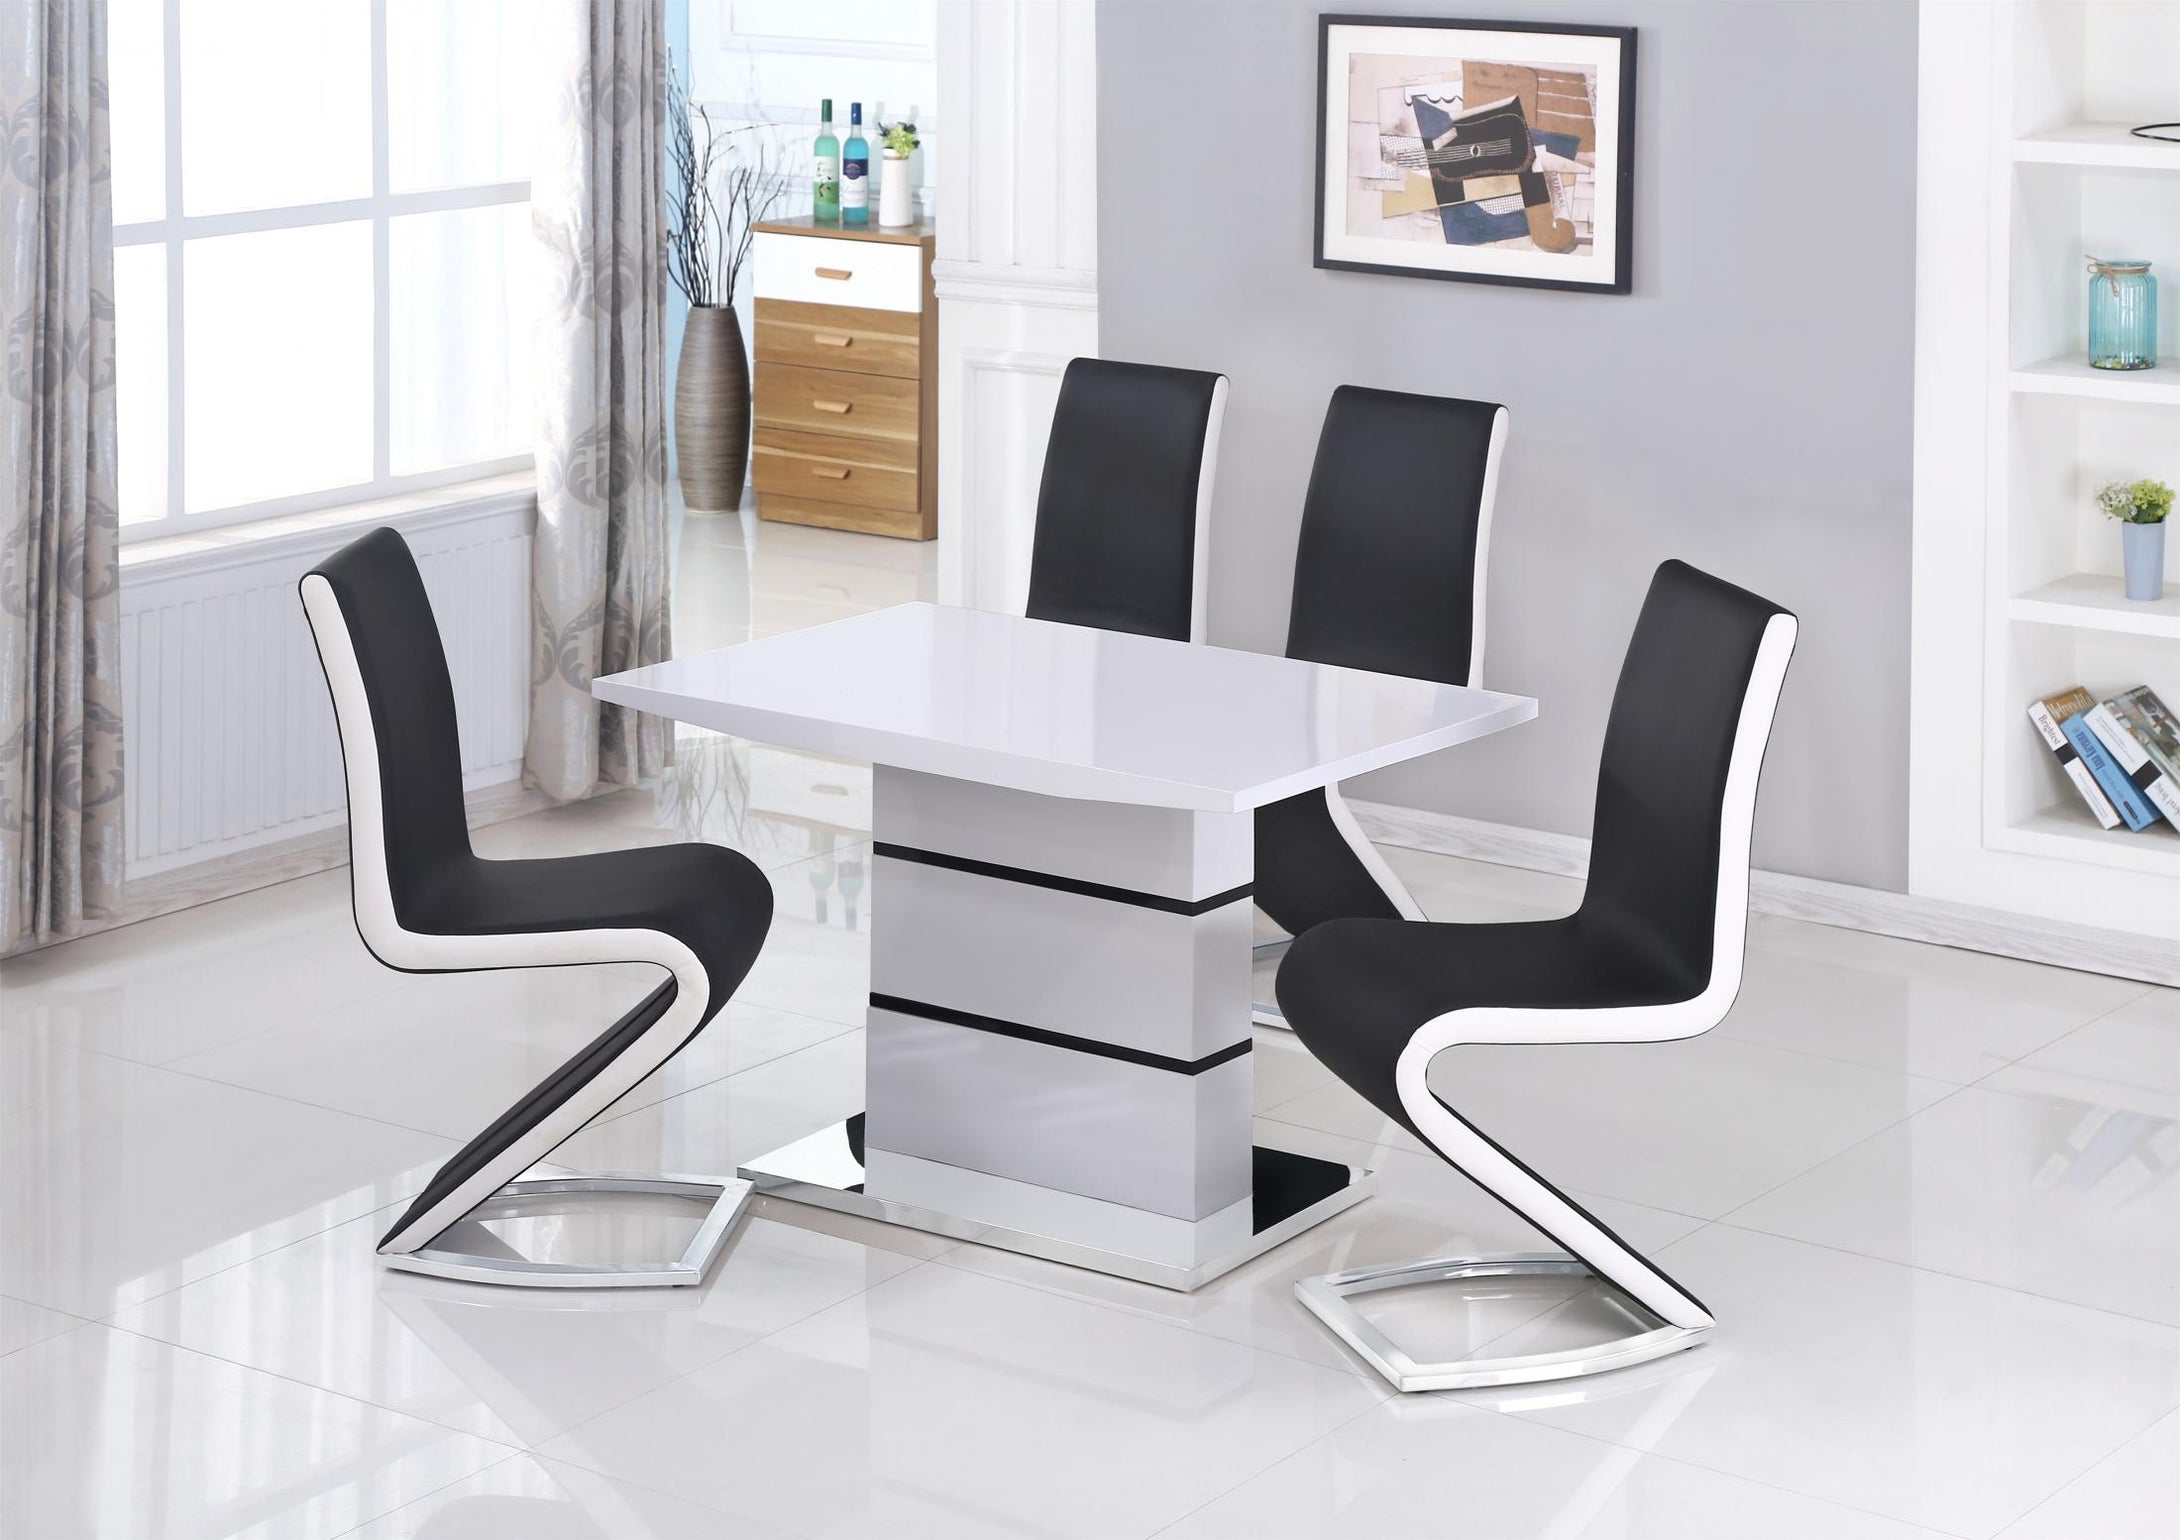 Leona Small High Gloss Dining Table White & Black